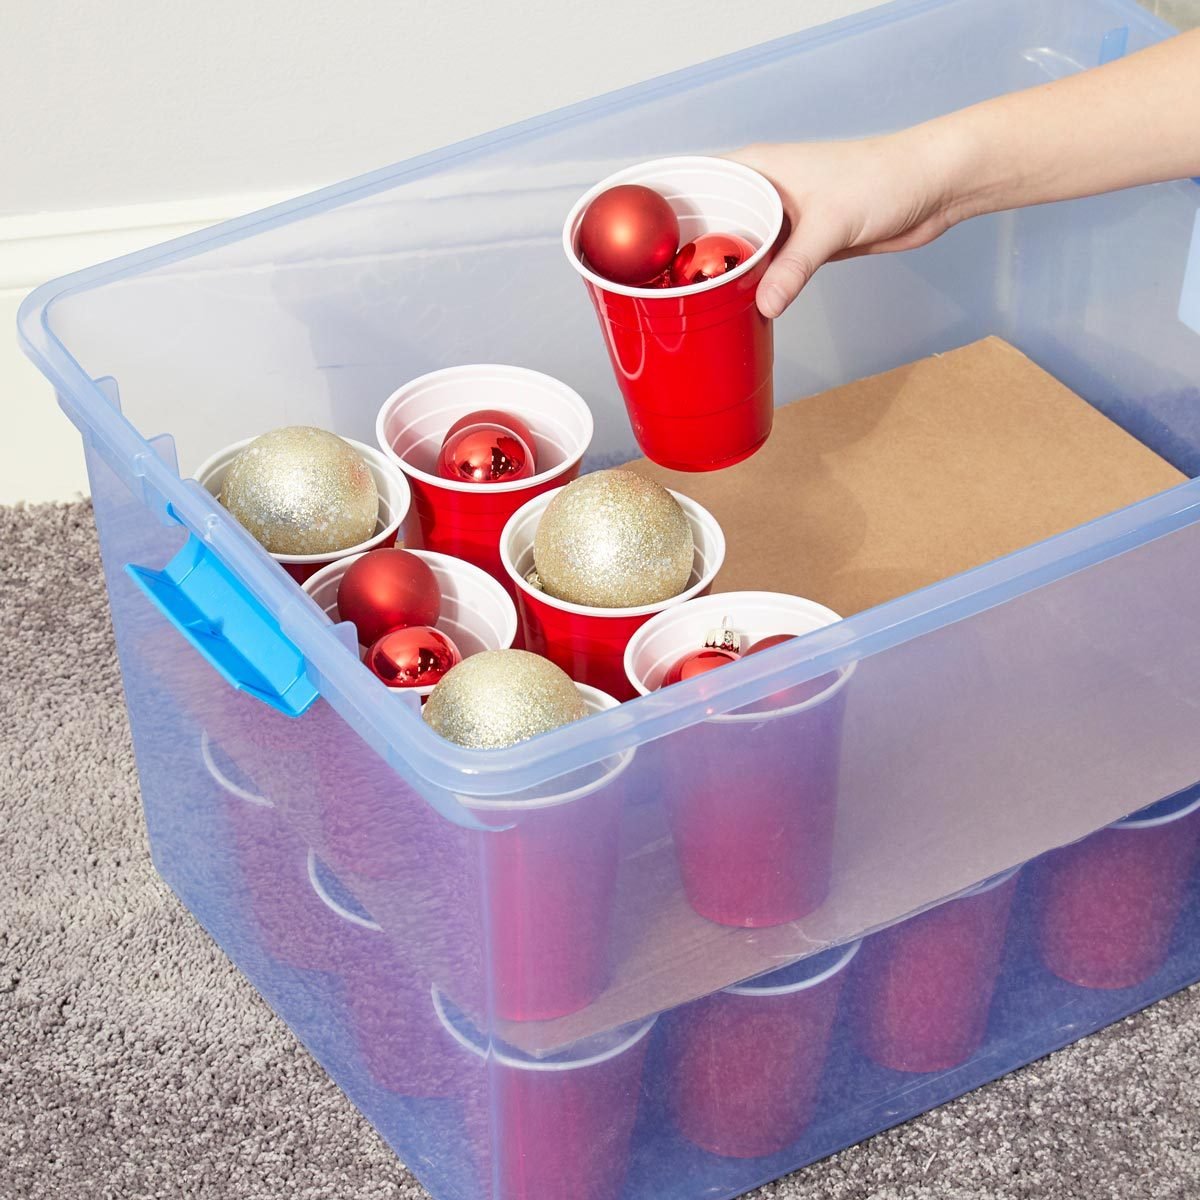 Holiday Storage Solution: A Non-Plastic Box for Ornaments - The